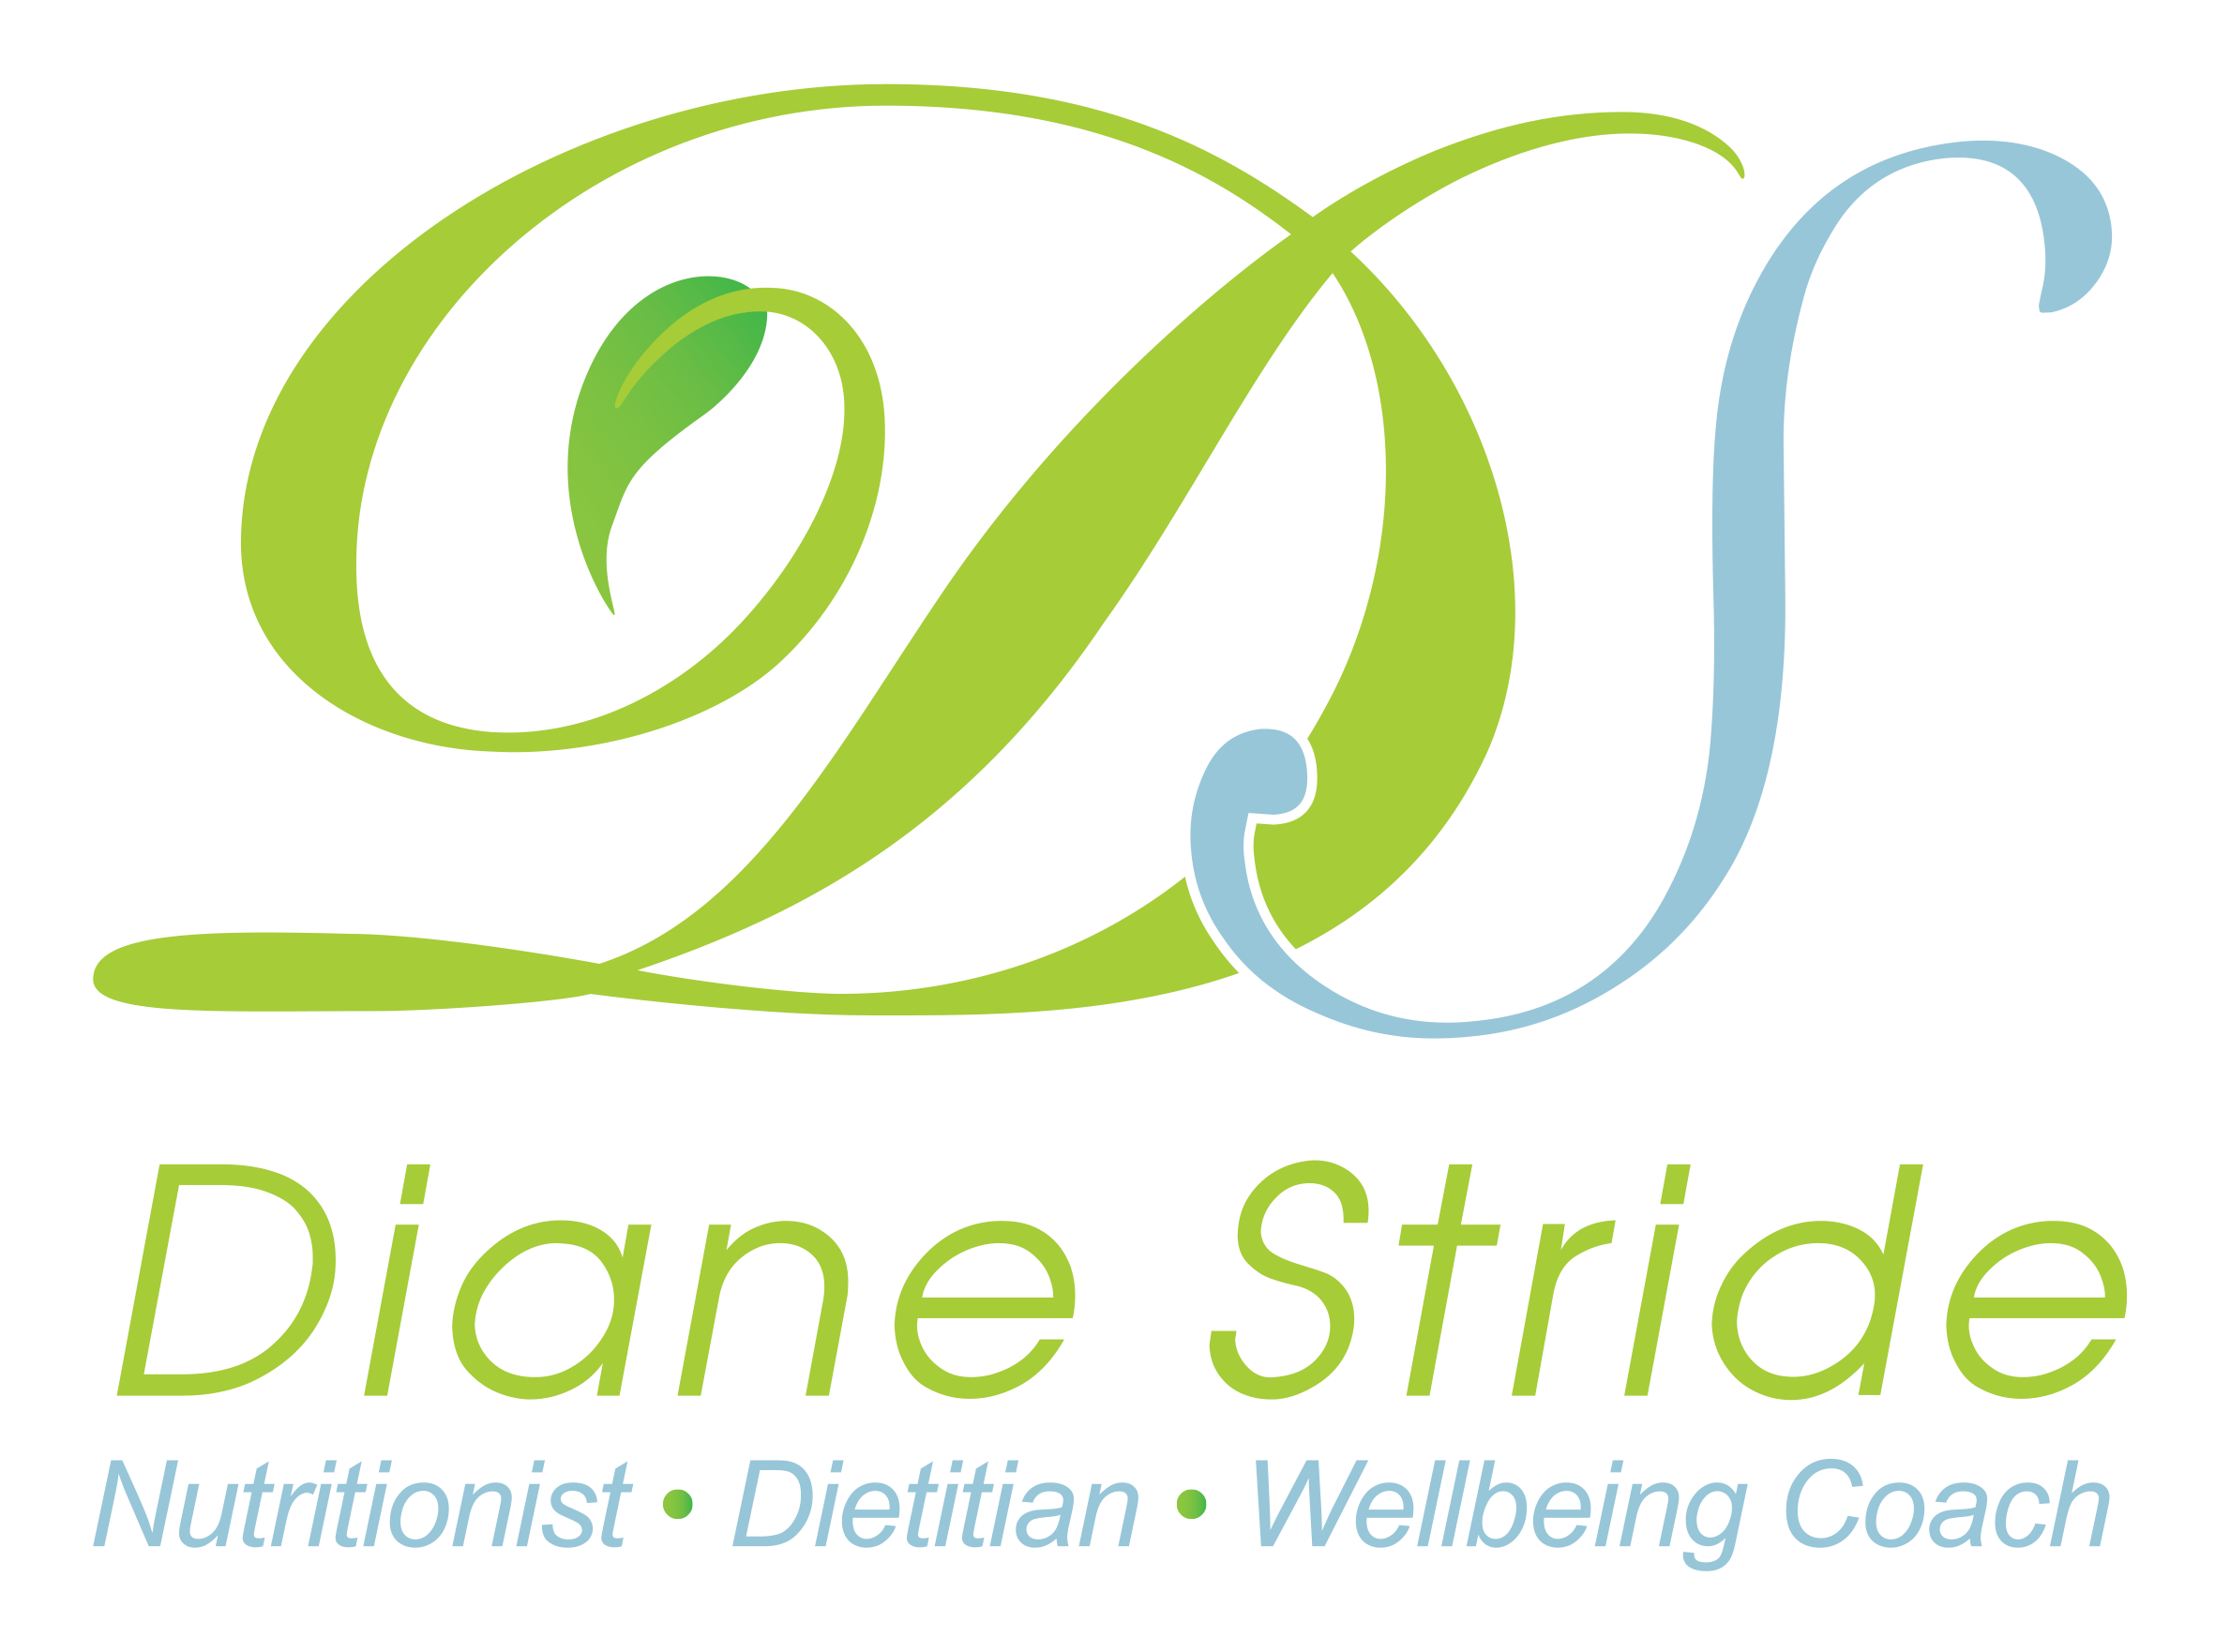 Diane Stride - Dietitian and Wellbeing Coach